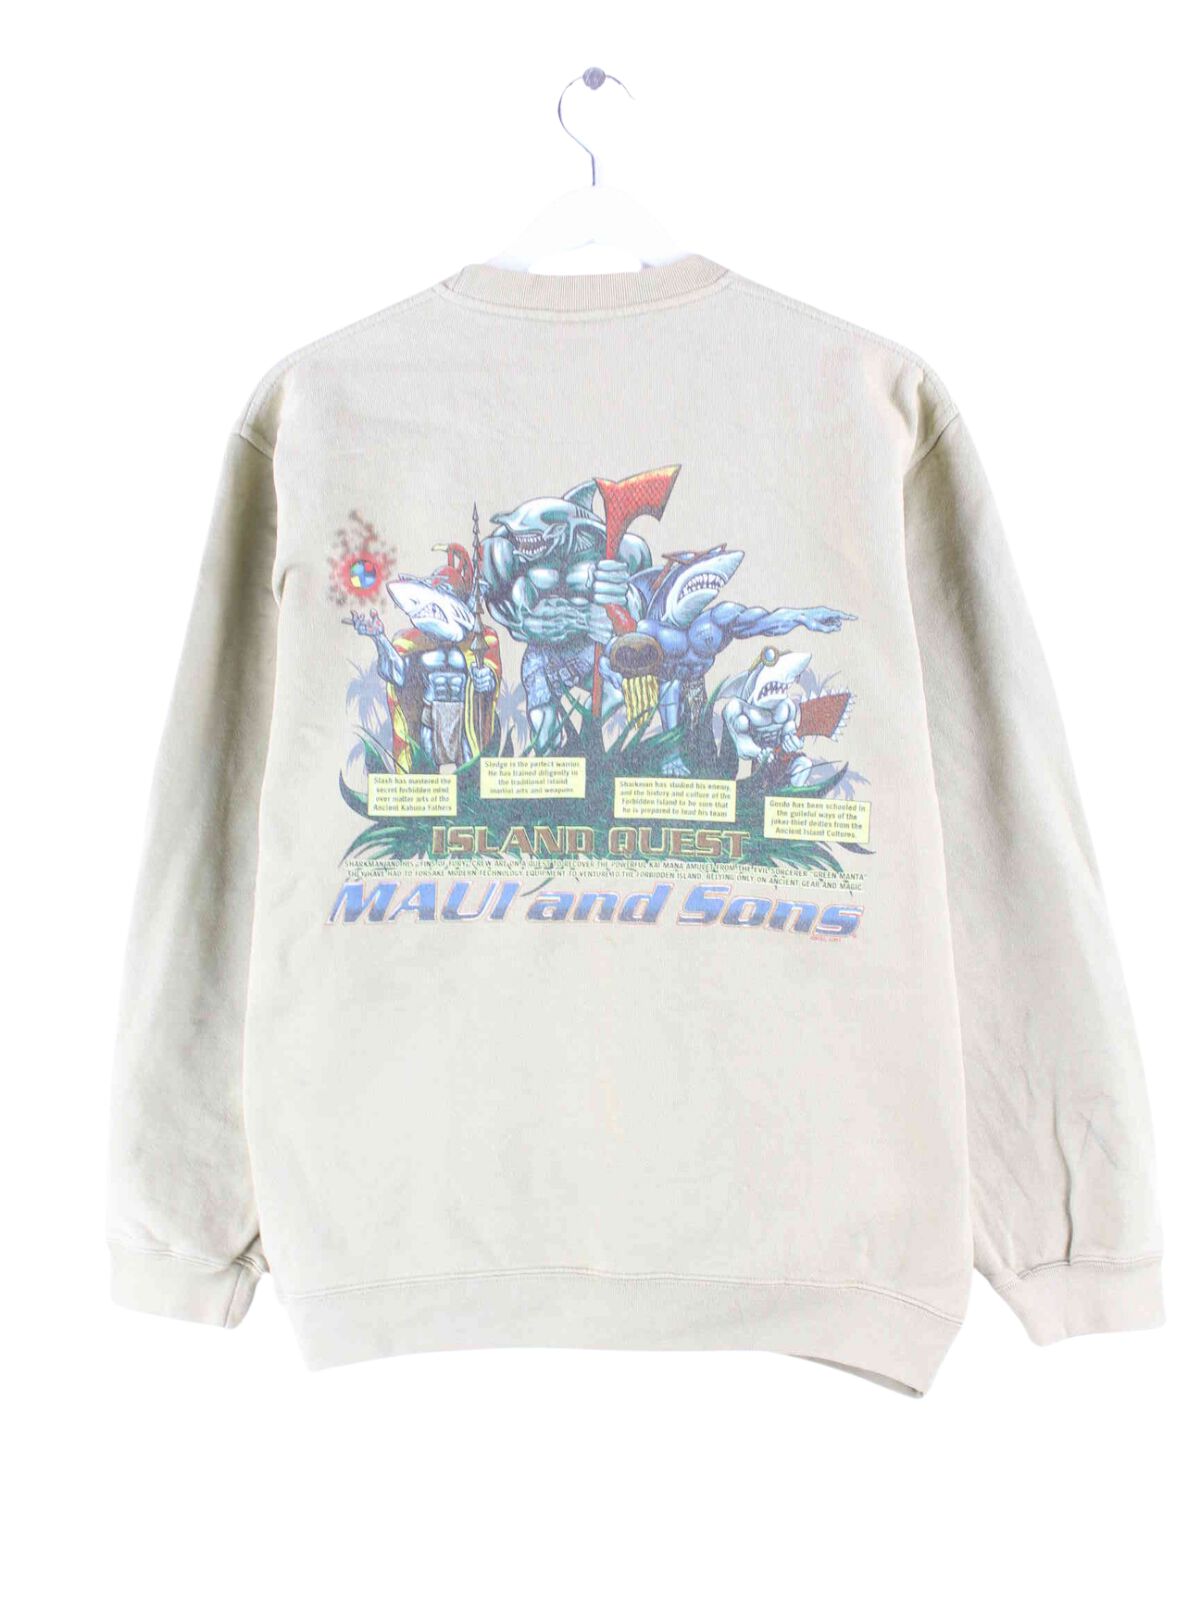 Vintage 90s Maui and Sons Print Sweater Beige S